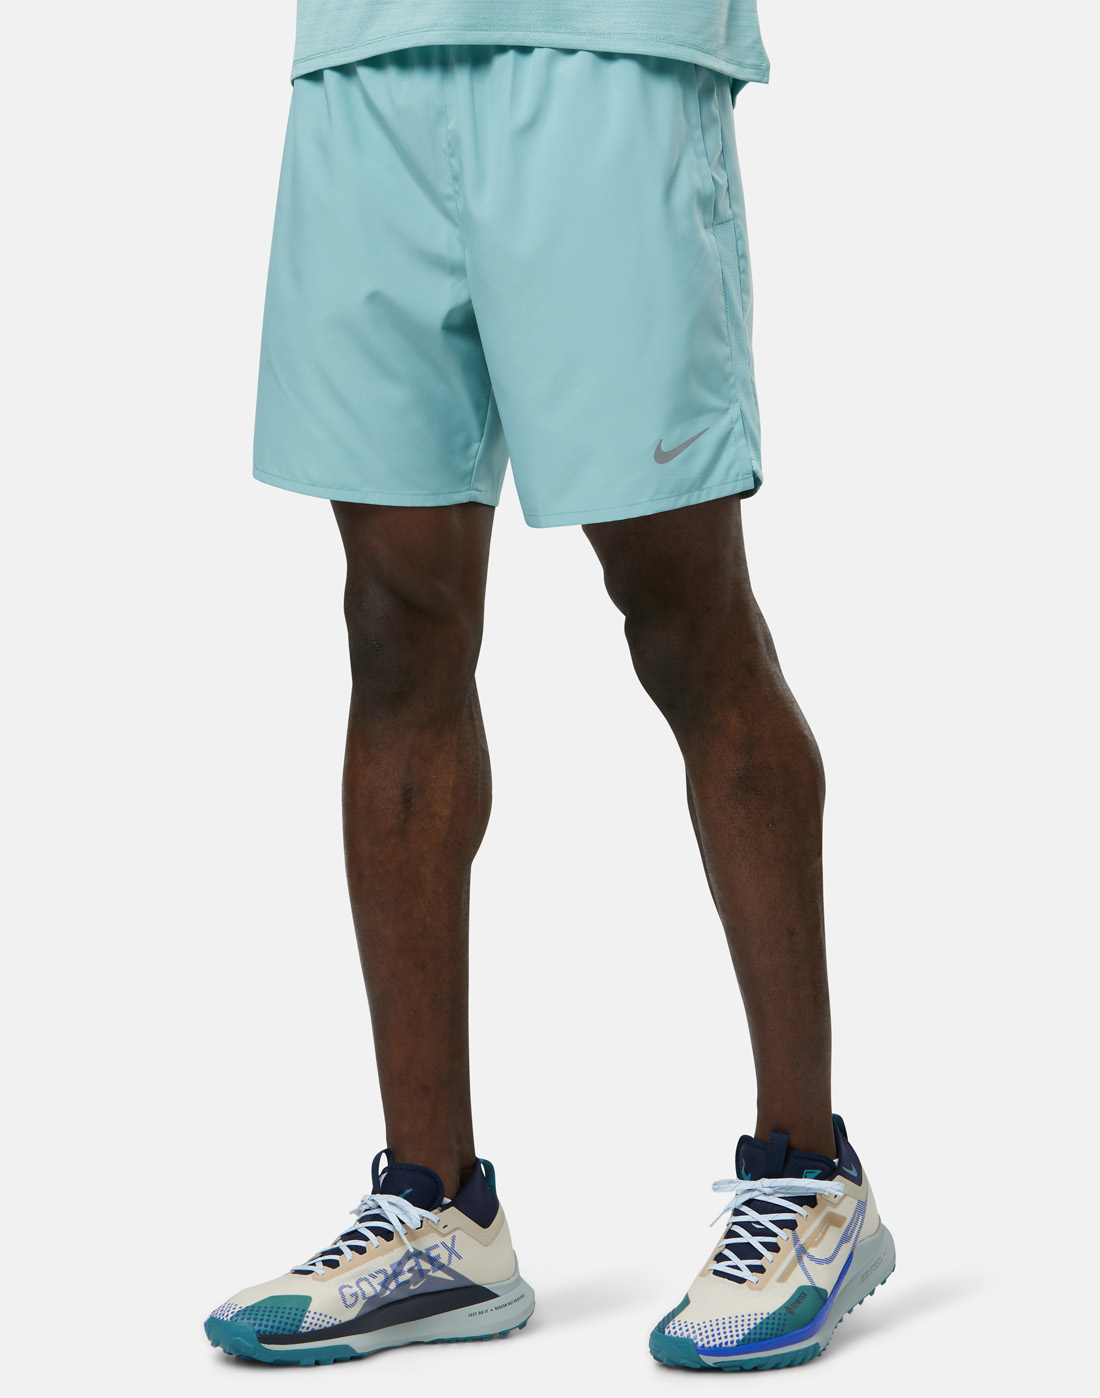 Nike Mens Challenger 7 Inch Shorts - Blue | Life Style Sports UK